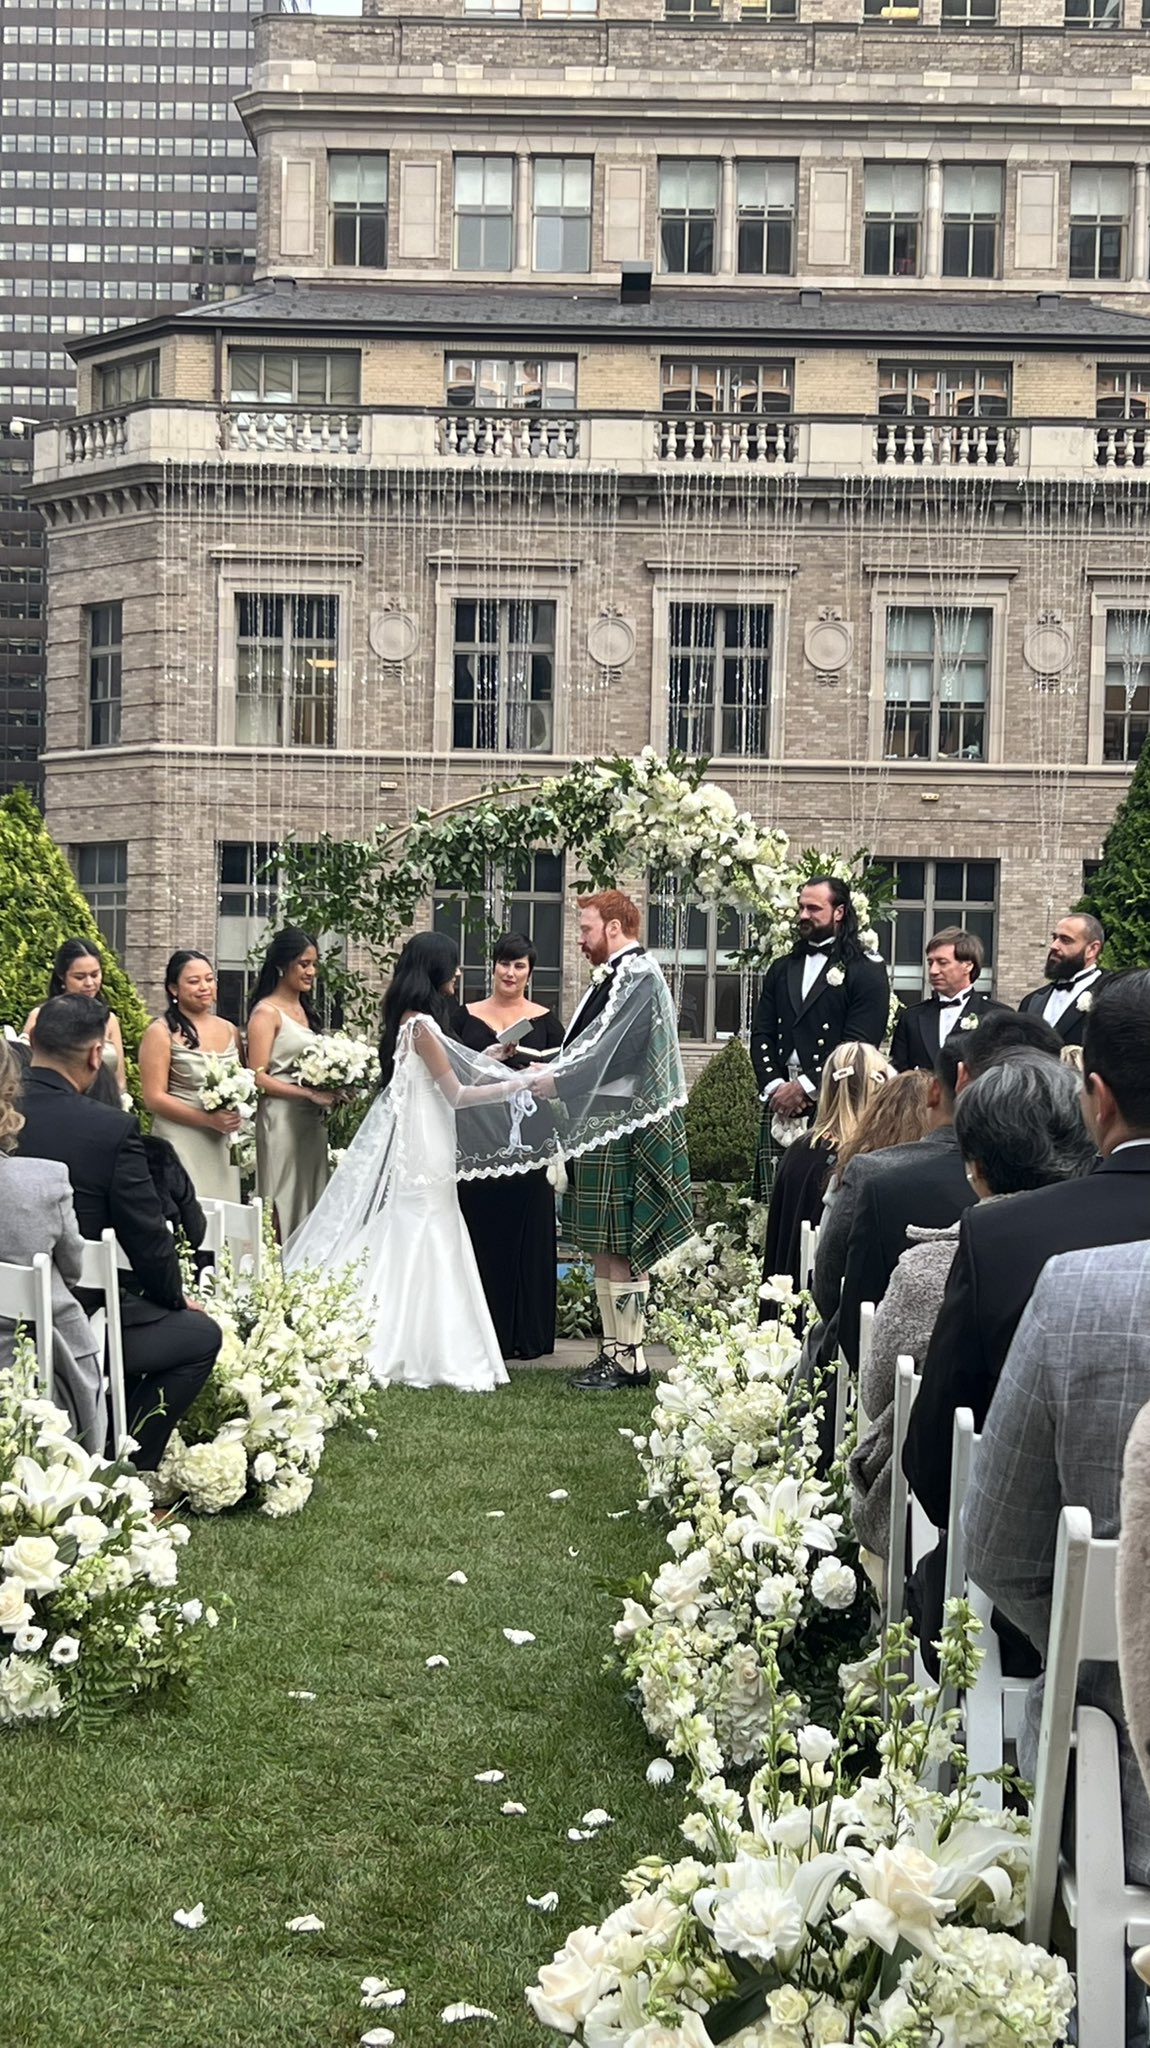 Meet WWE ace Sheamus' stunning new wife Isabella Revilla after their  star-studded wedding which included AEW rivals